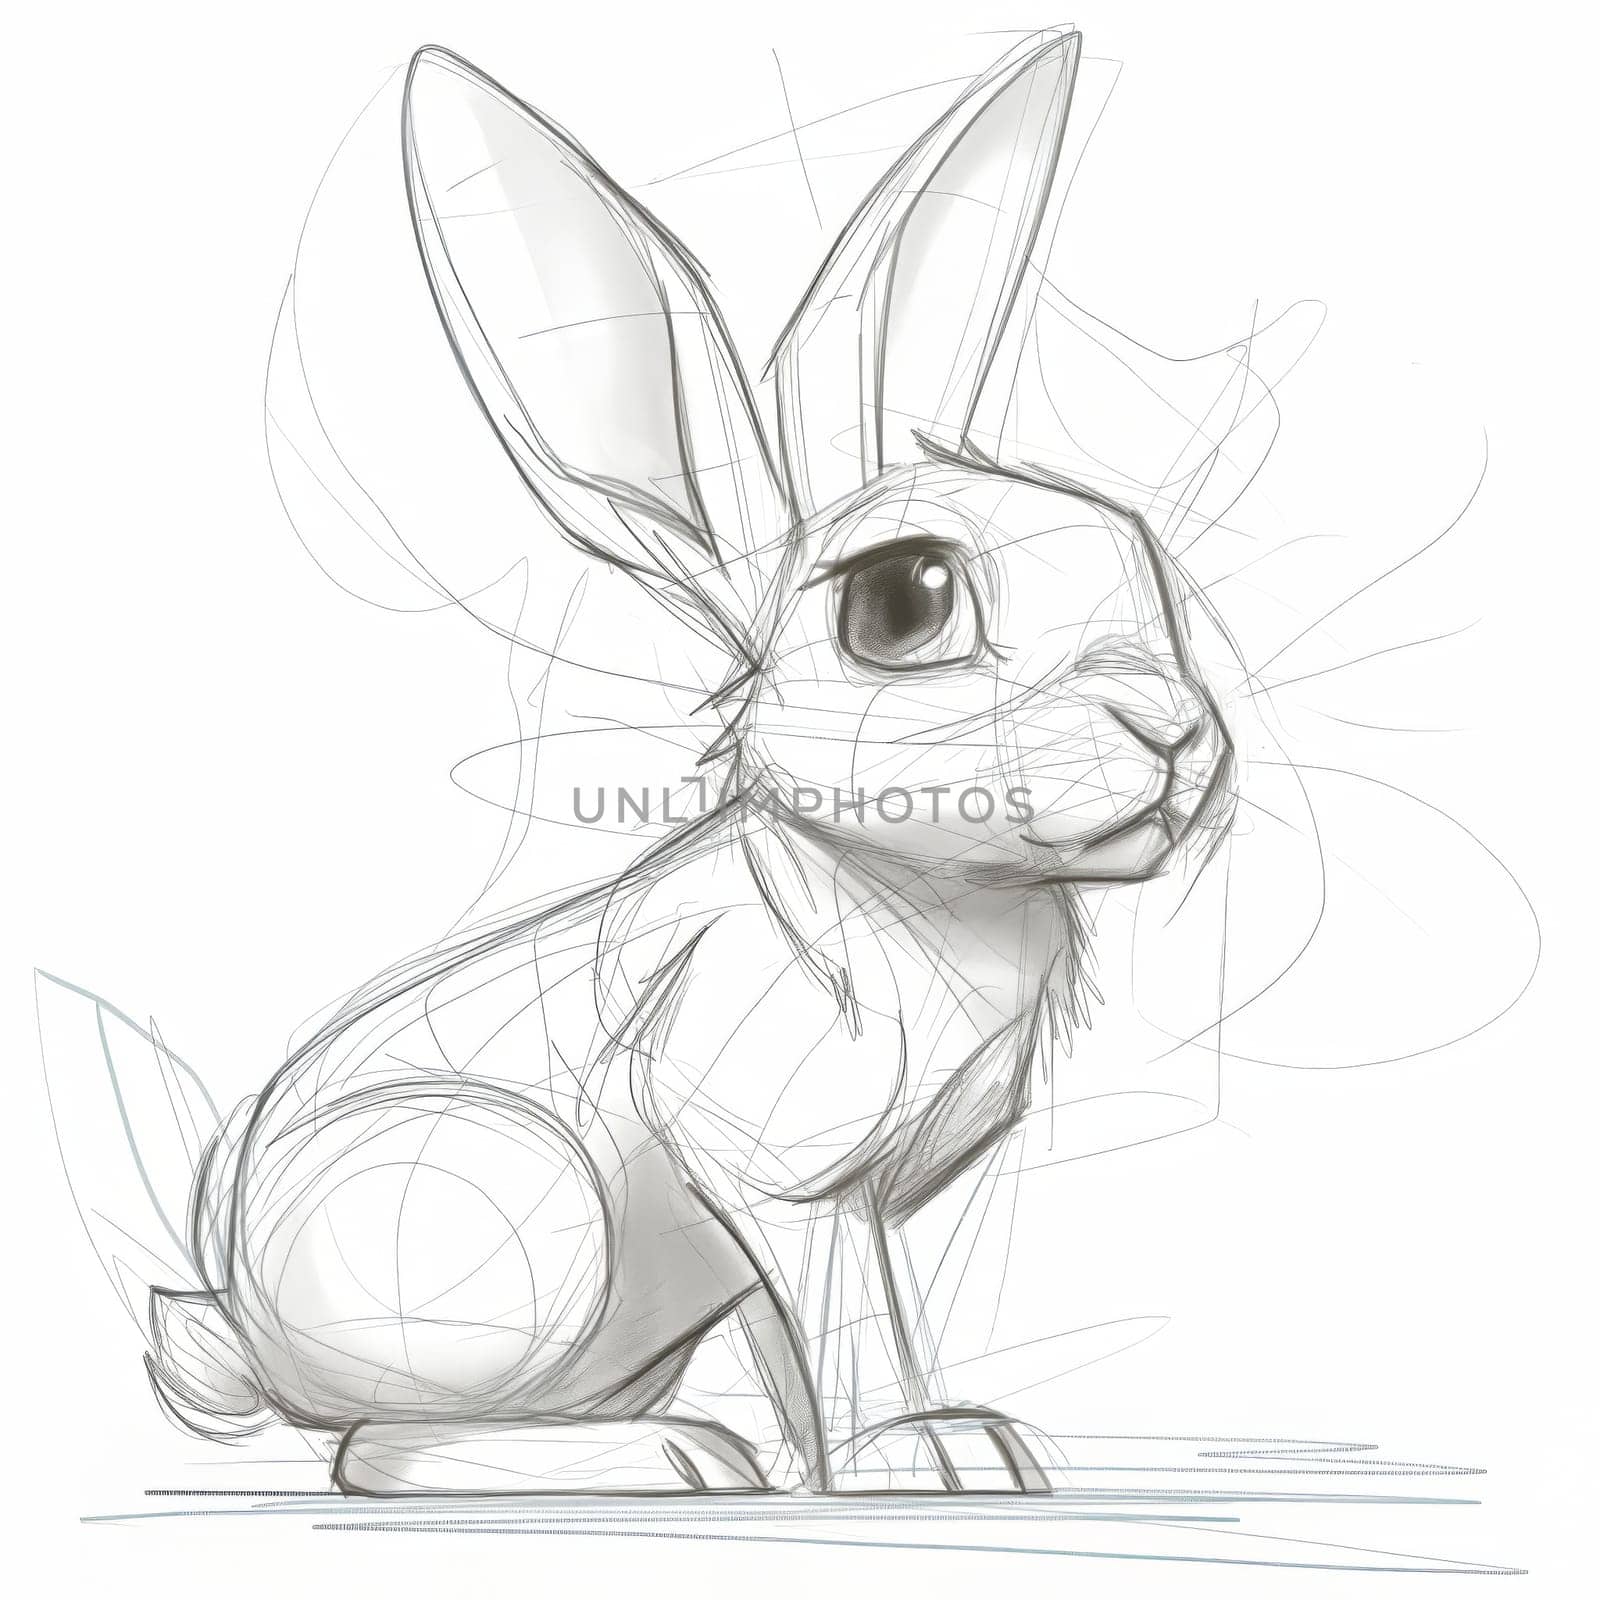 Sketch of a rabbit on a white background. by Fischeron